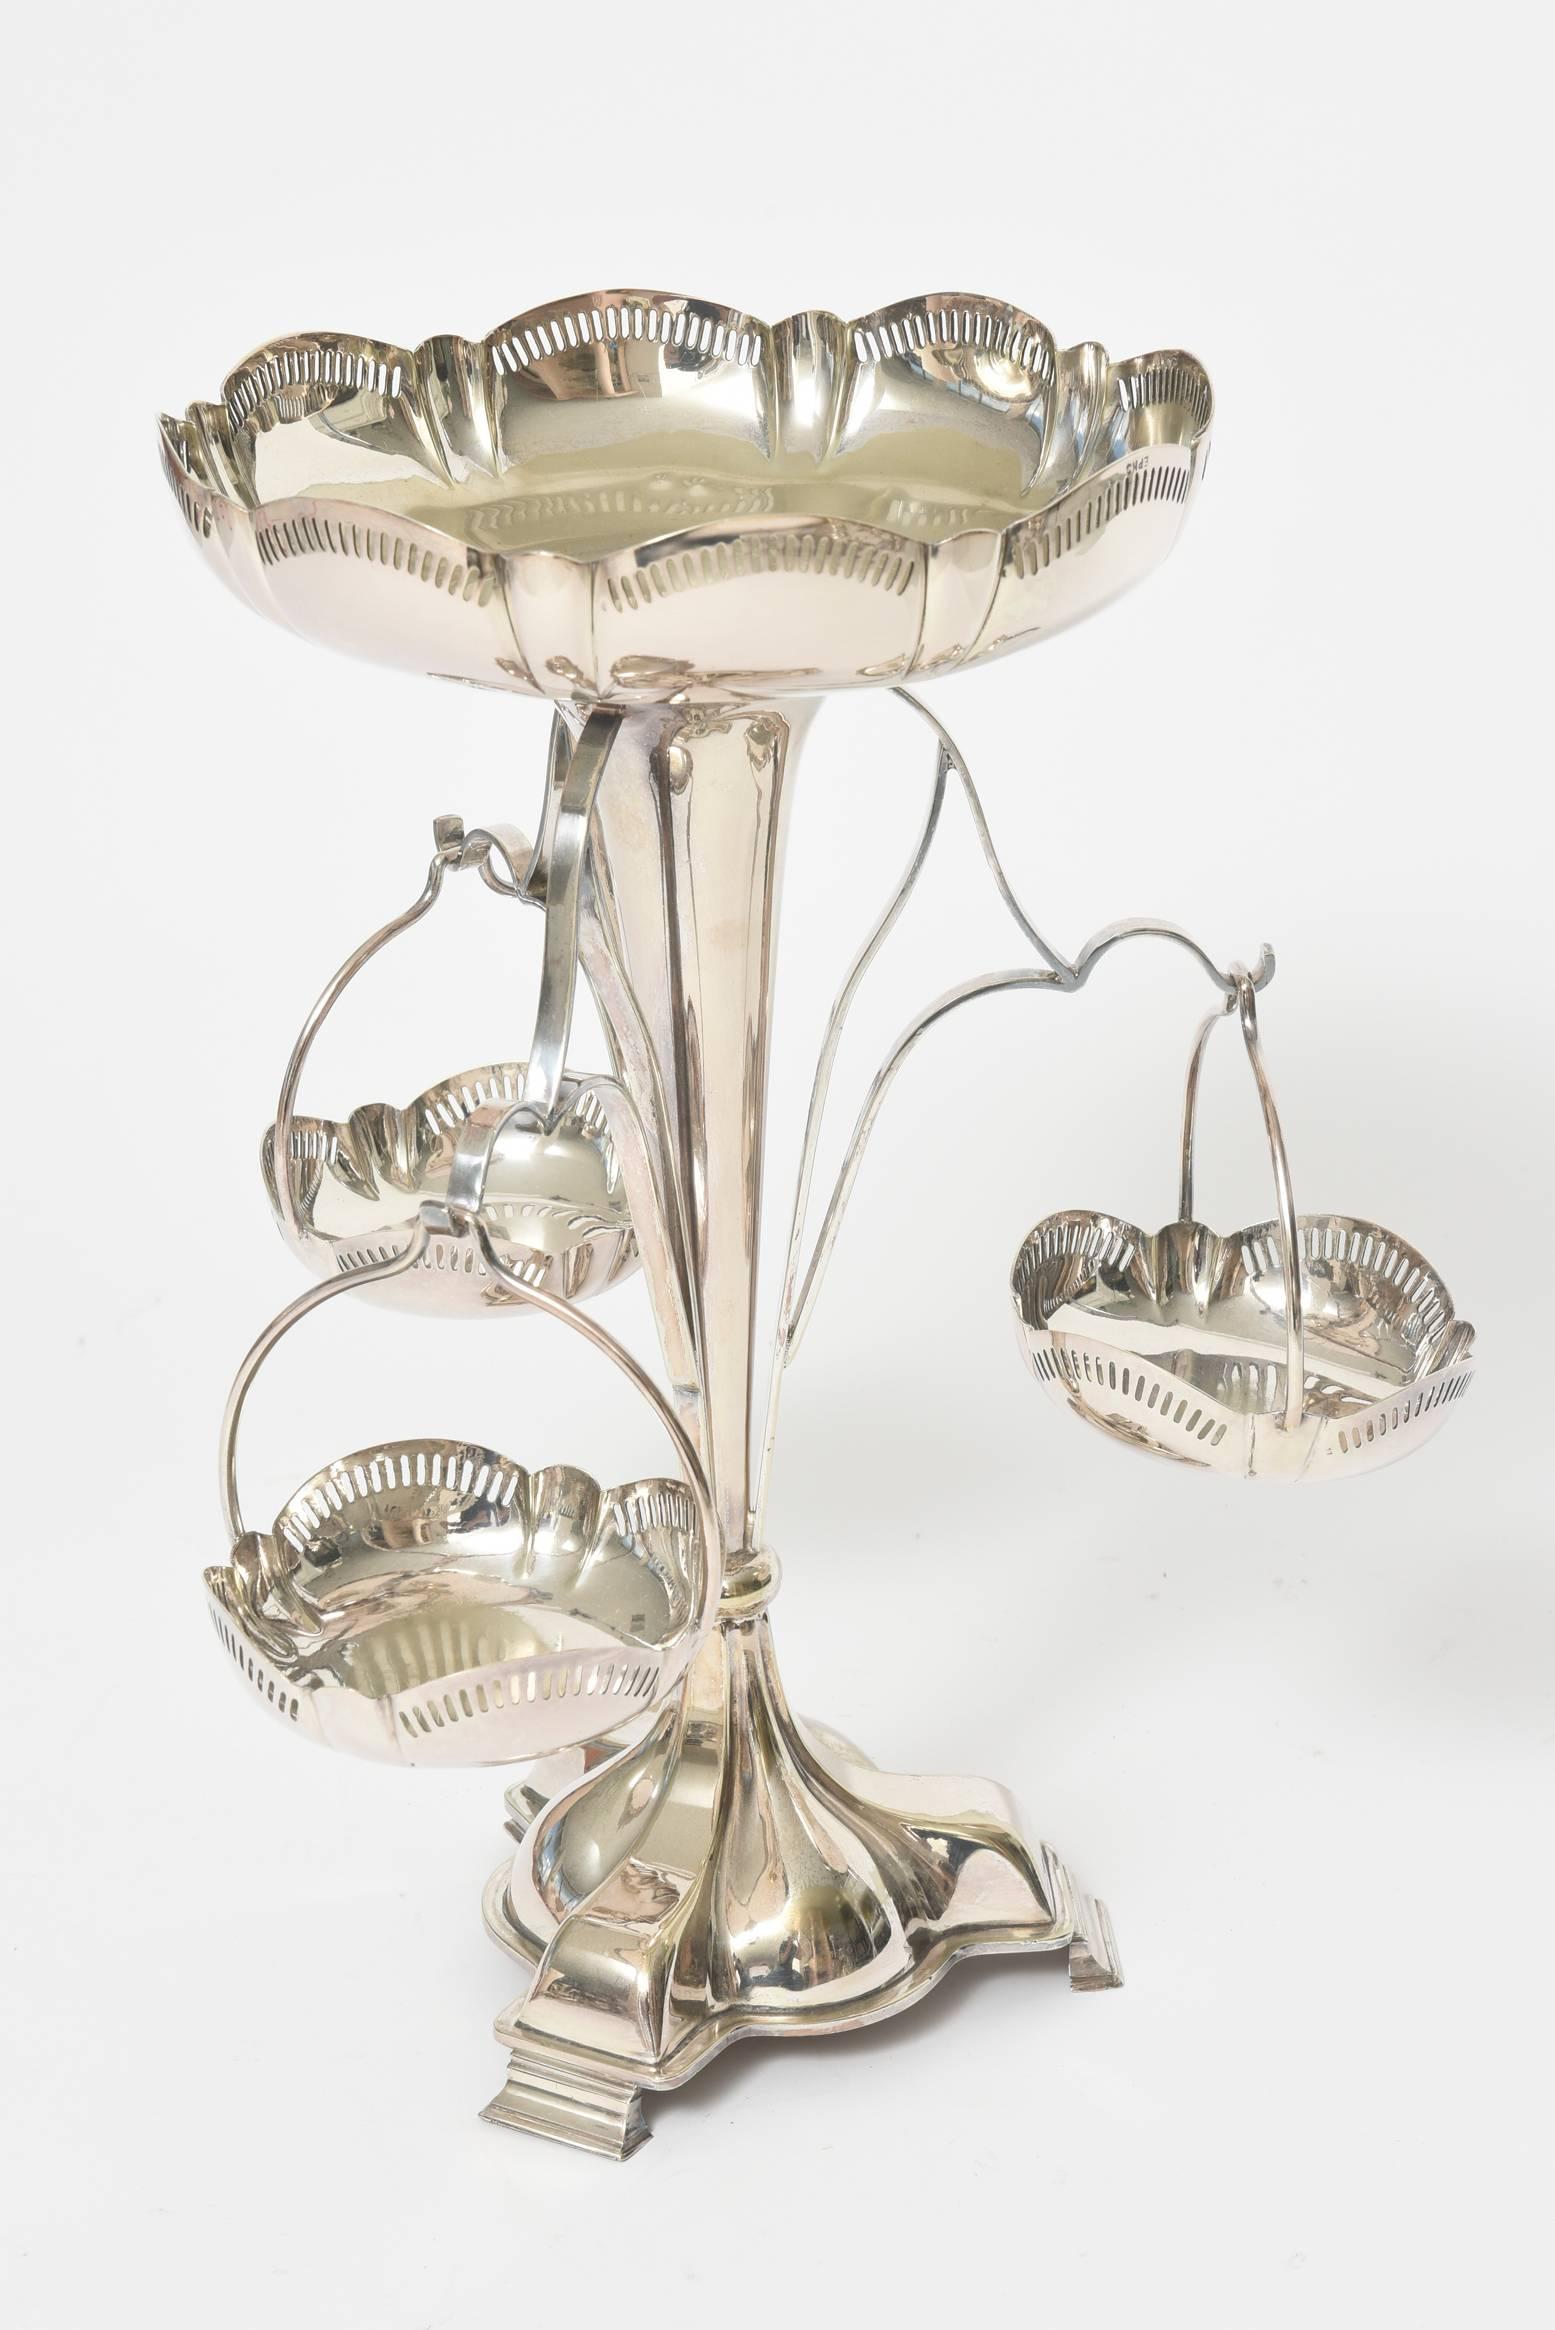 Elegant Edwardian pierced silver plate epergne with a scalloped edge featuring a top basket for fruit or desserts and three lower baskets for mints or candies. 

Marked EPNS (electroplated nickel silver) 

Base without baskets: 13.25